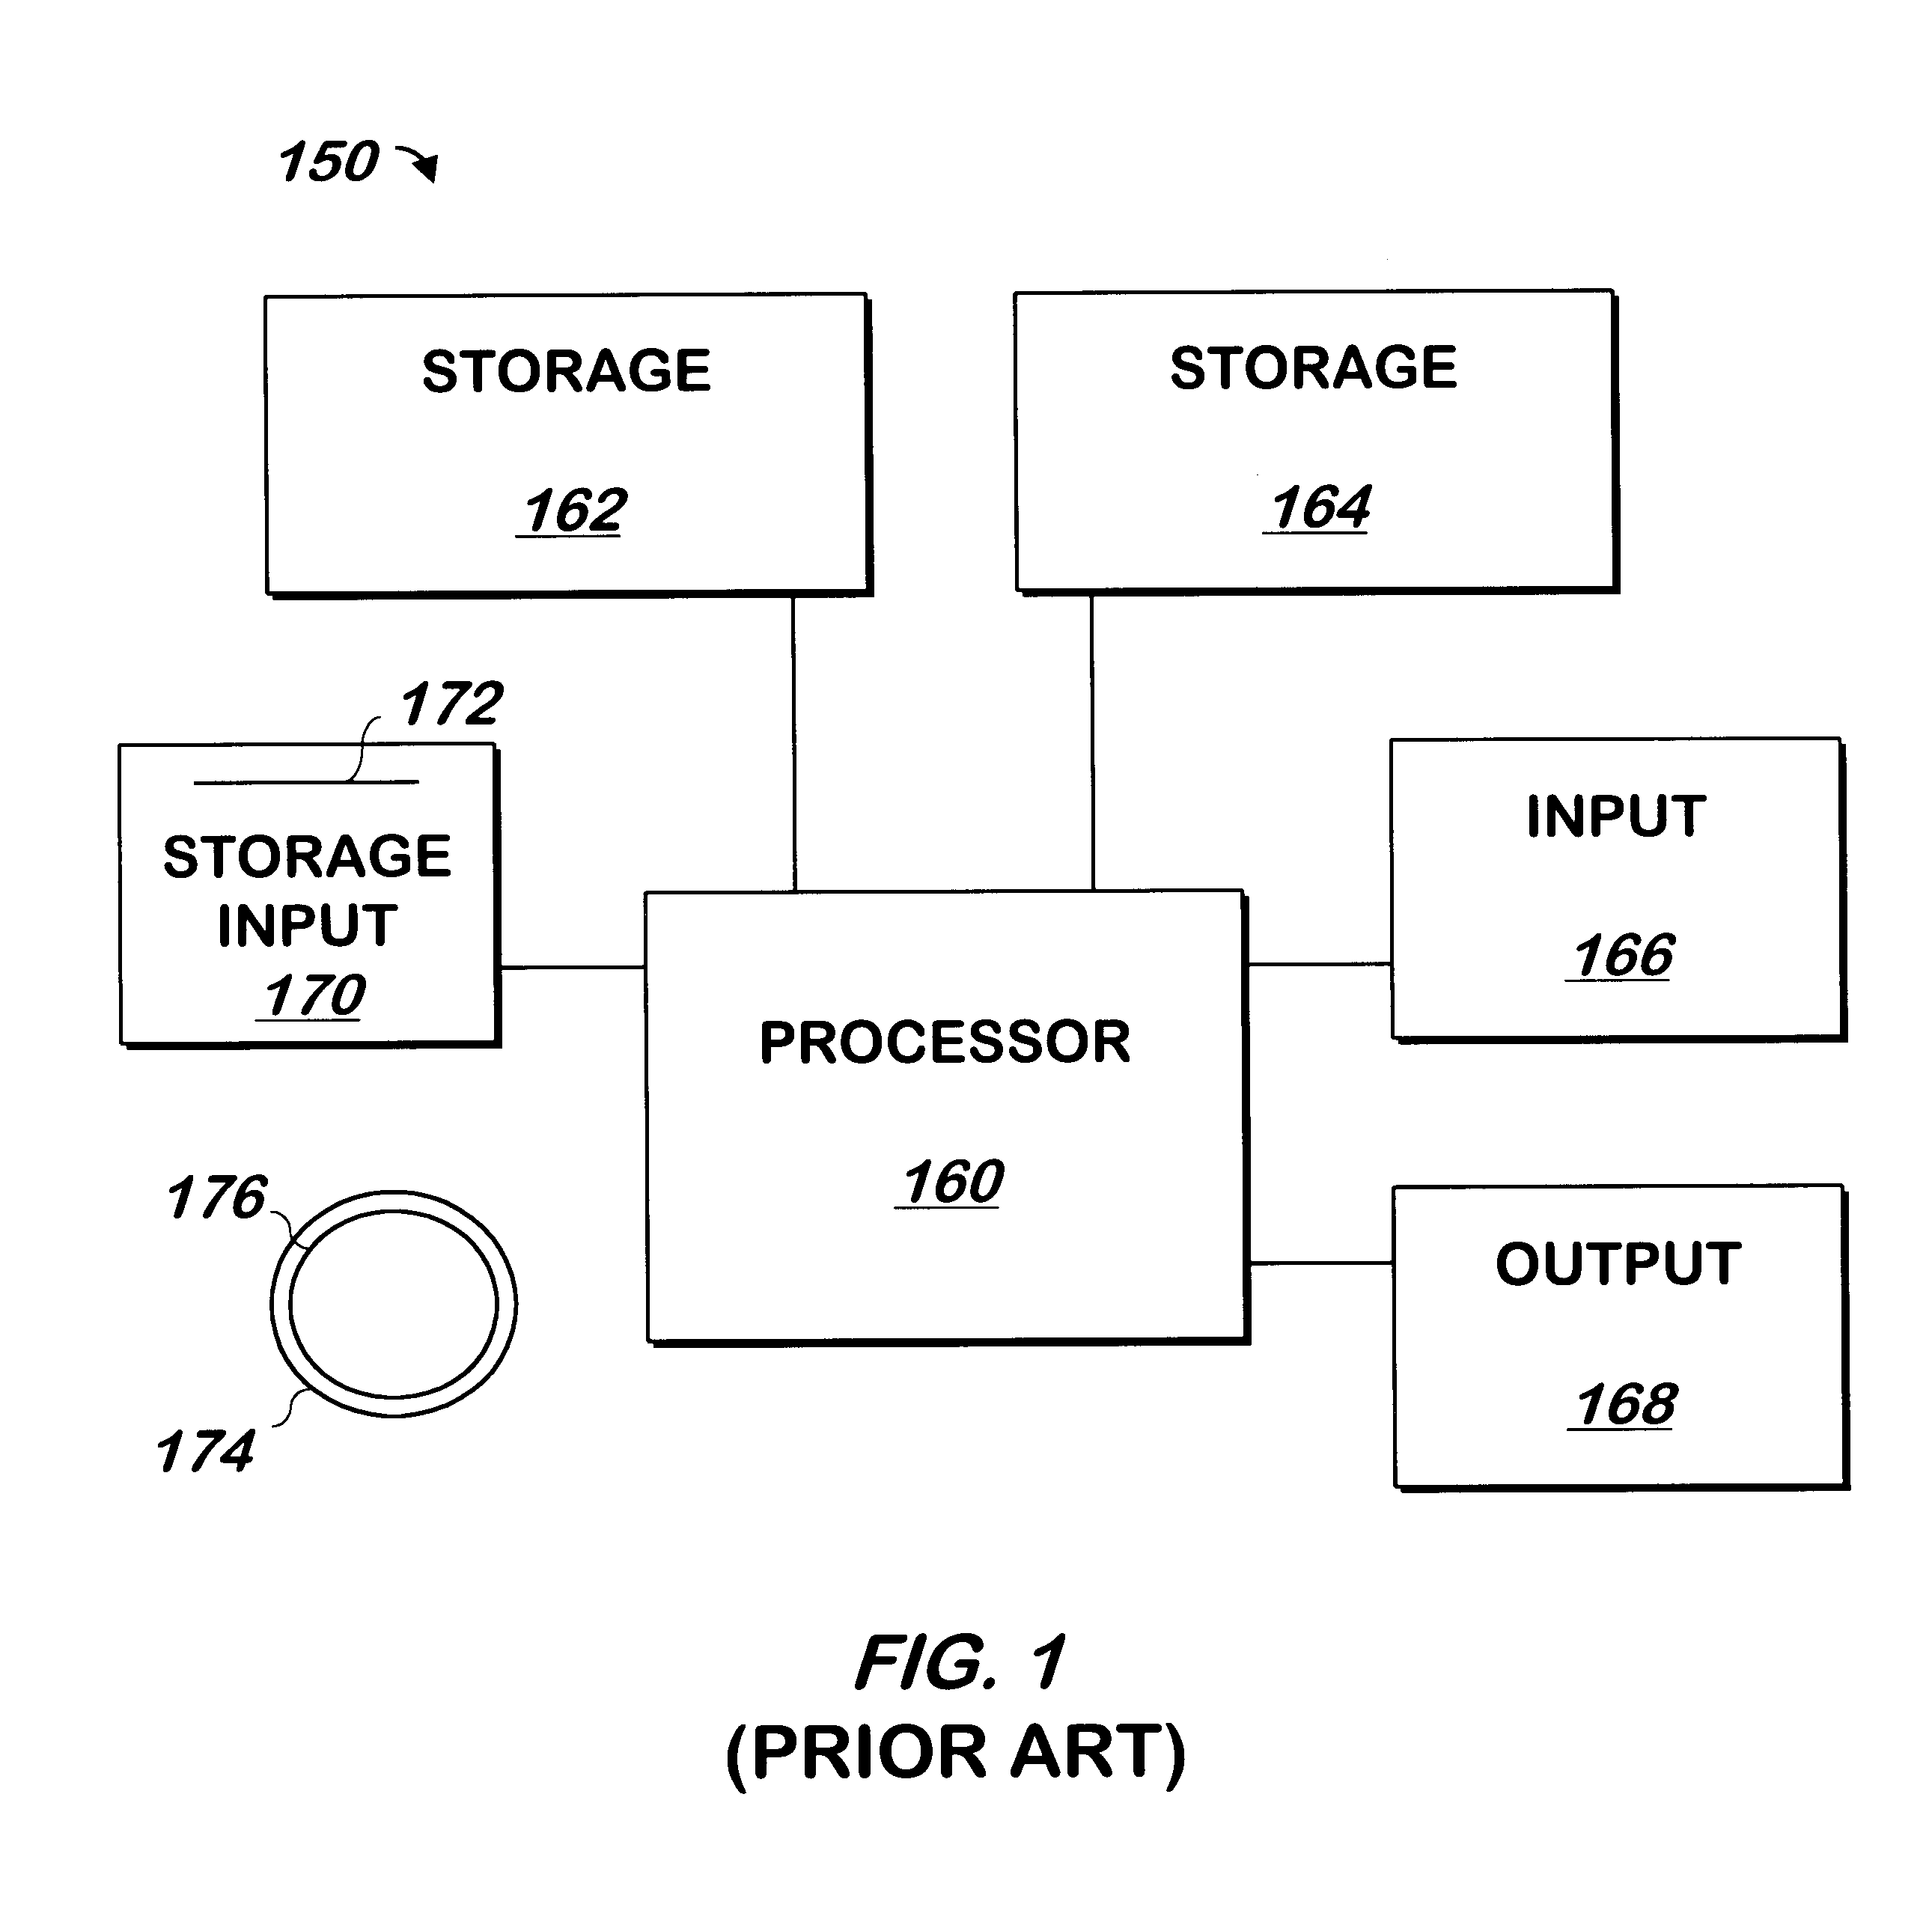 Method and apparatus for recovering encryption session keys